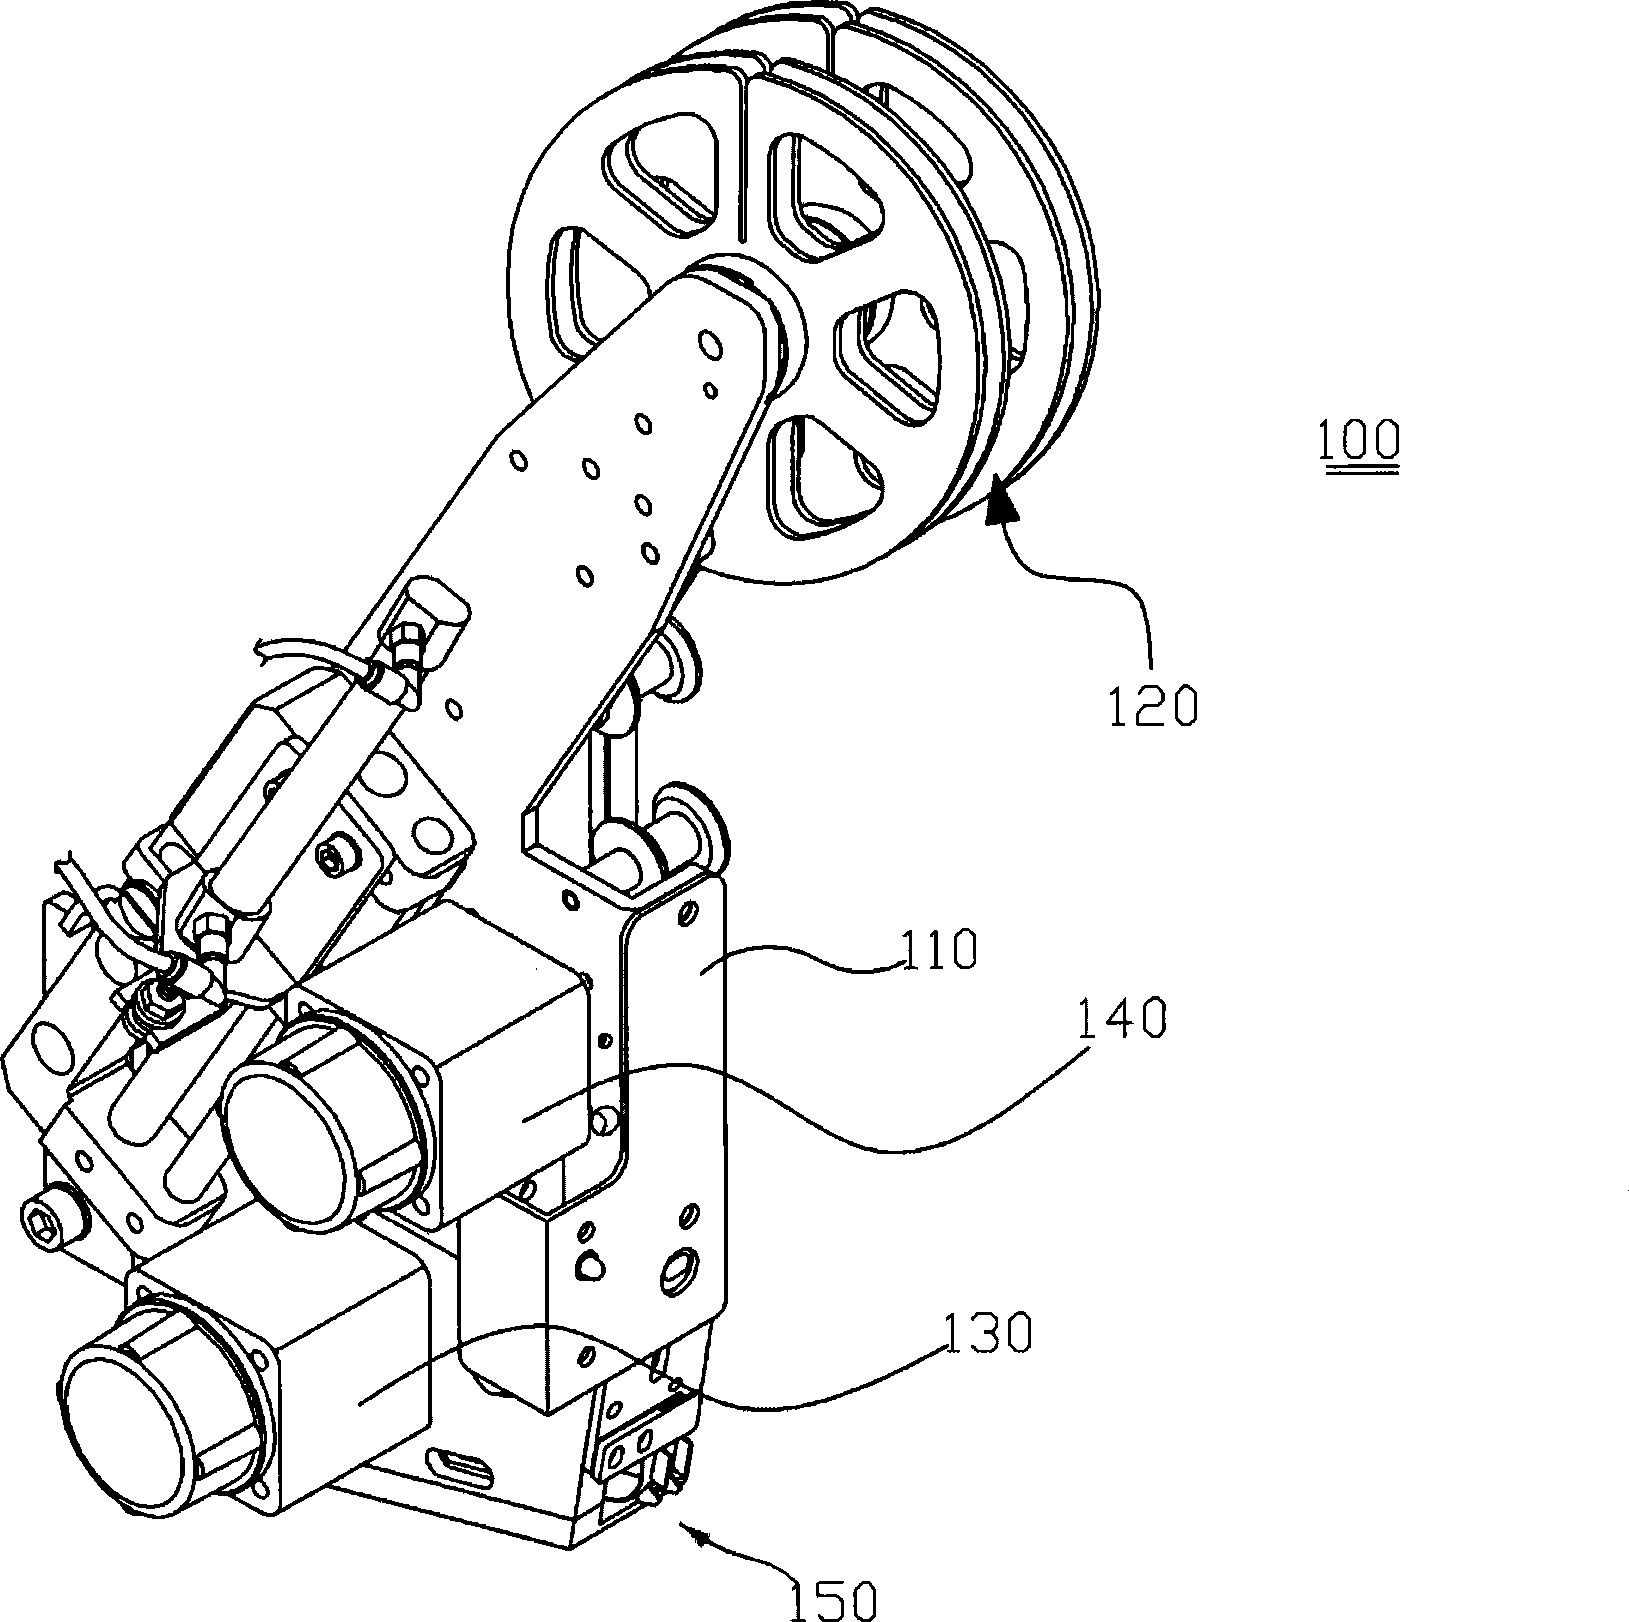 Bright clip feed device in embroidery machine